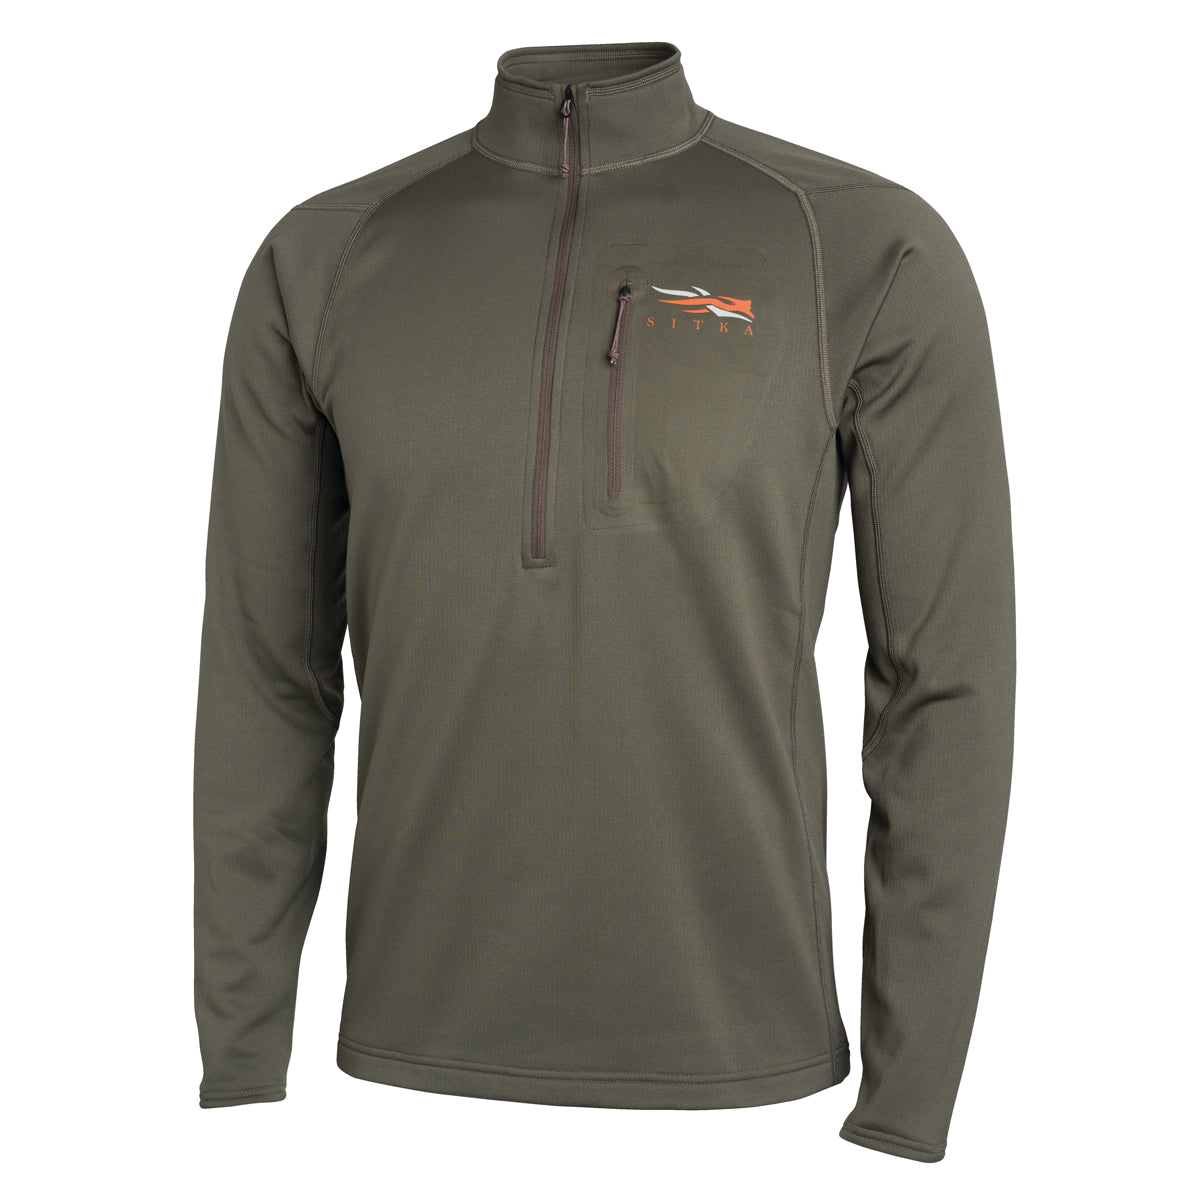 Sitka Core Midweight Zip-T by Sitka | Apparel - goHUNT Shop